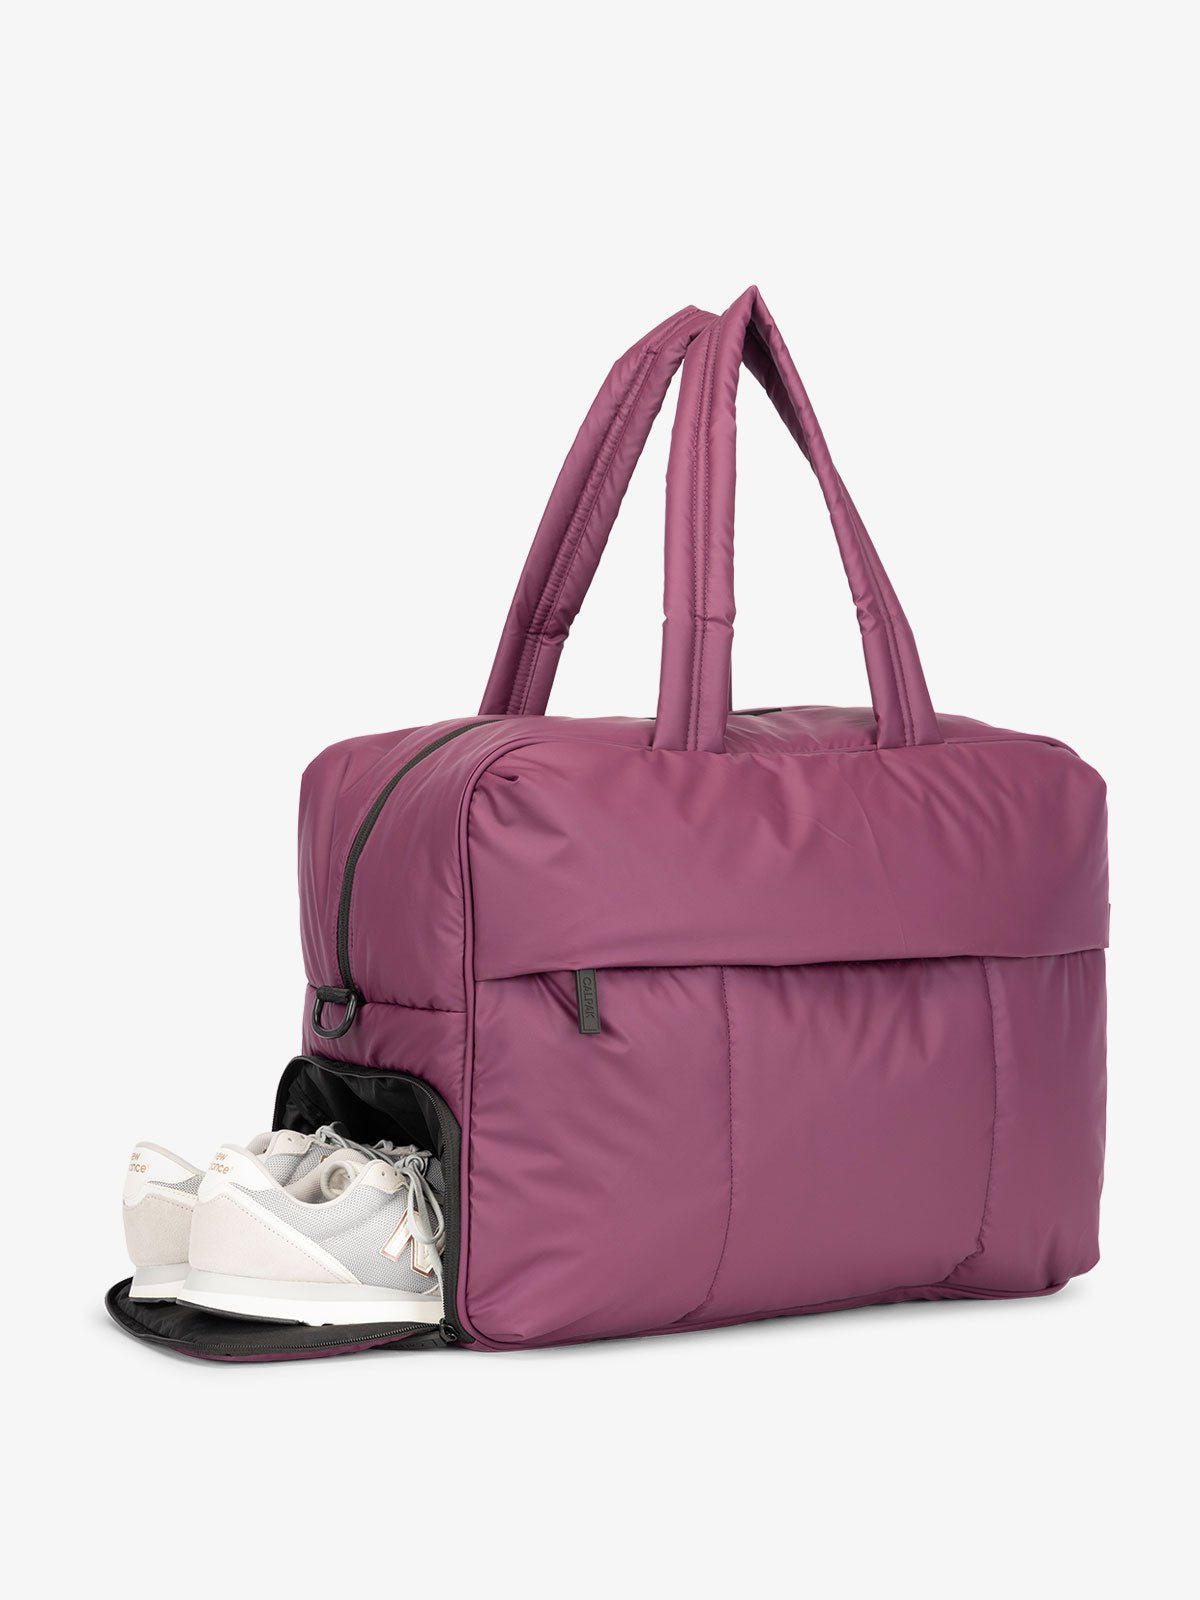 CALPAK Luka large duffel bag with side shoe compartment and dual handles in purple